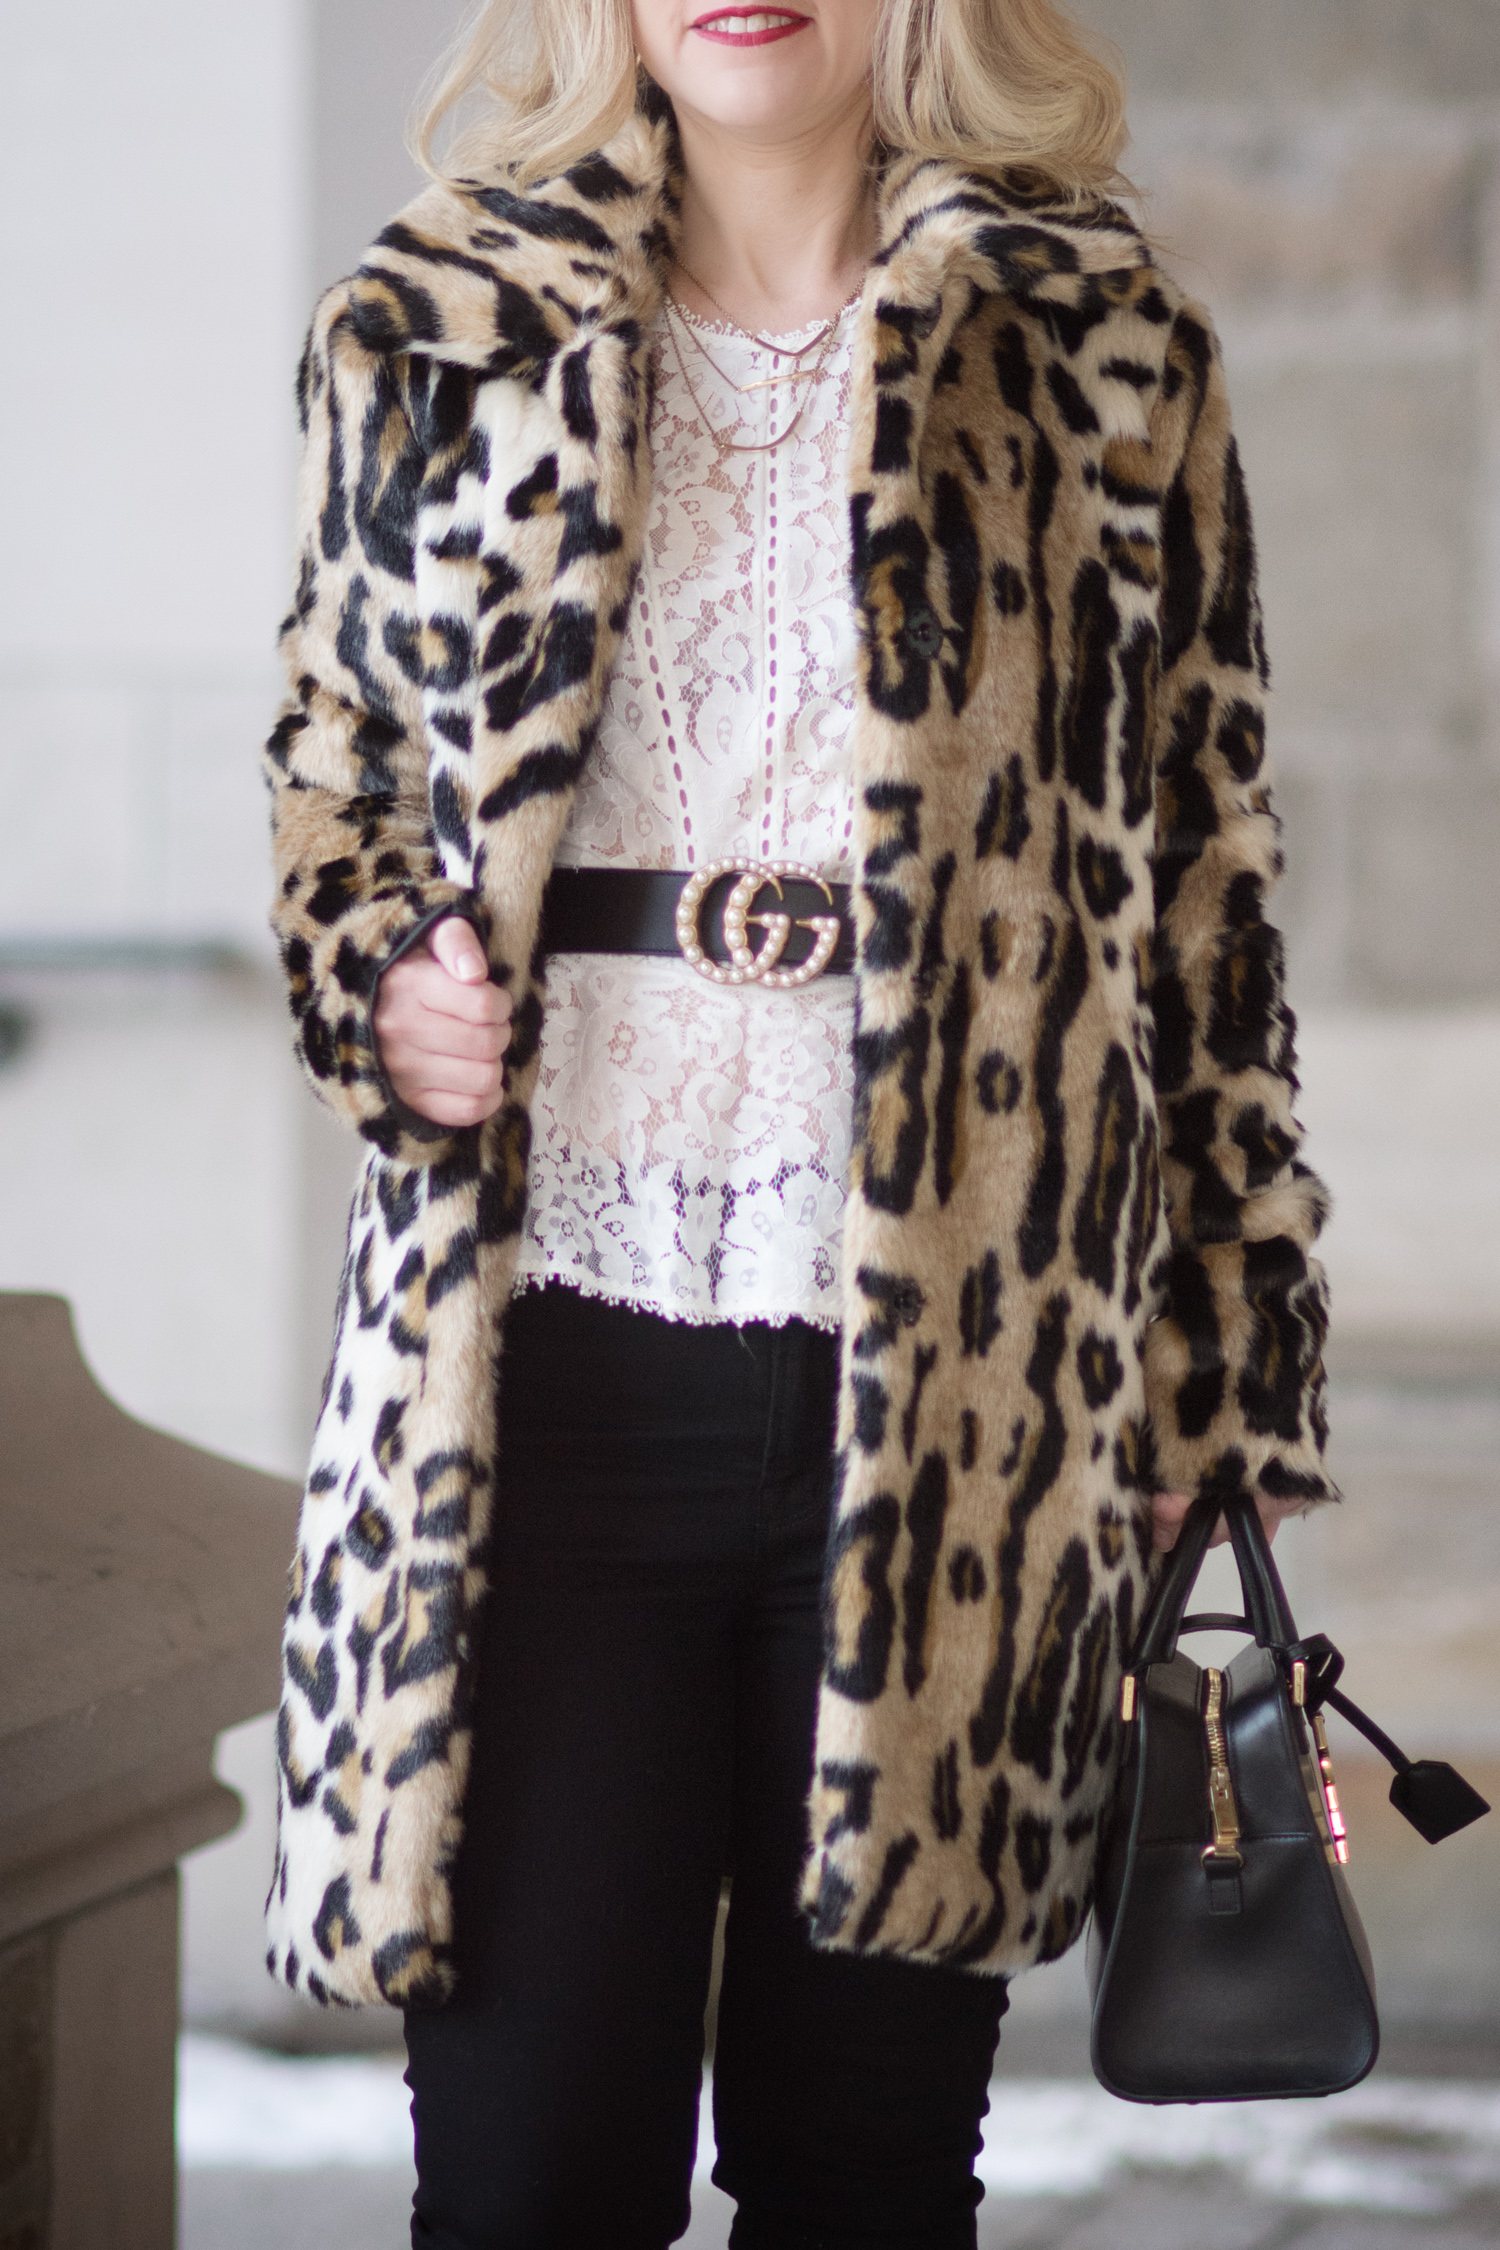 6 Reasons Why You Need A Leopard Coat… – The Blue Hydrangeas – A Petite